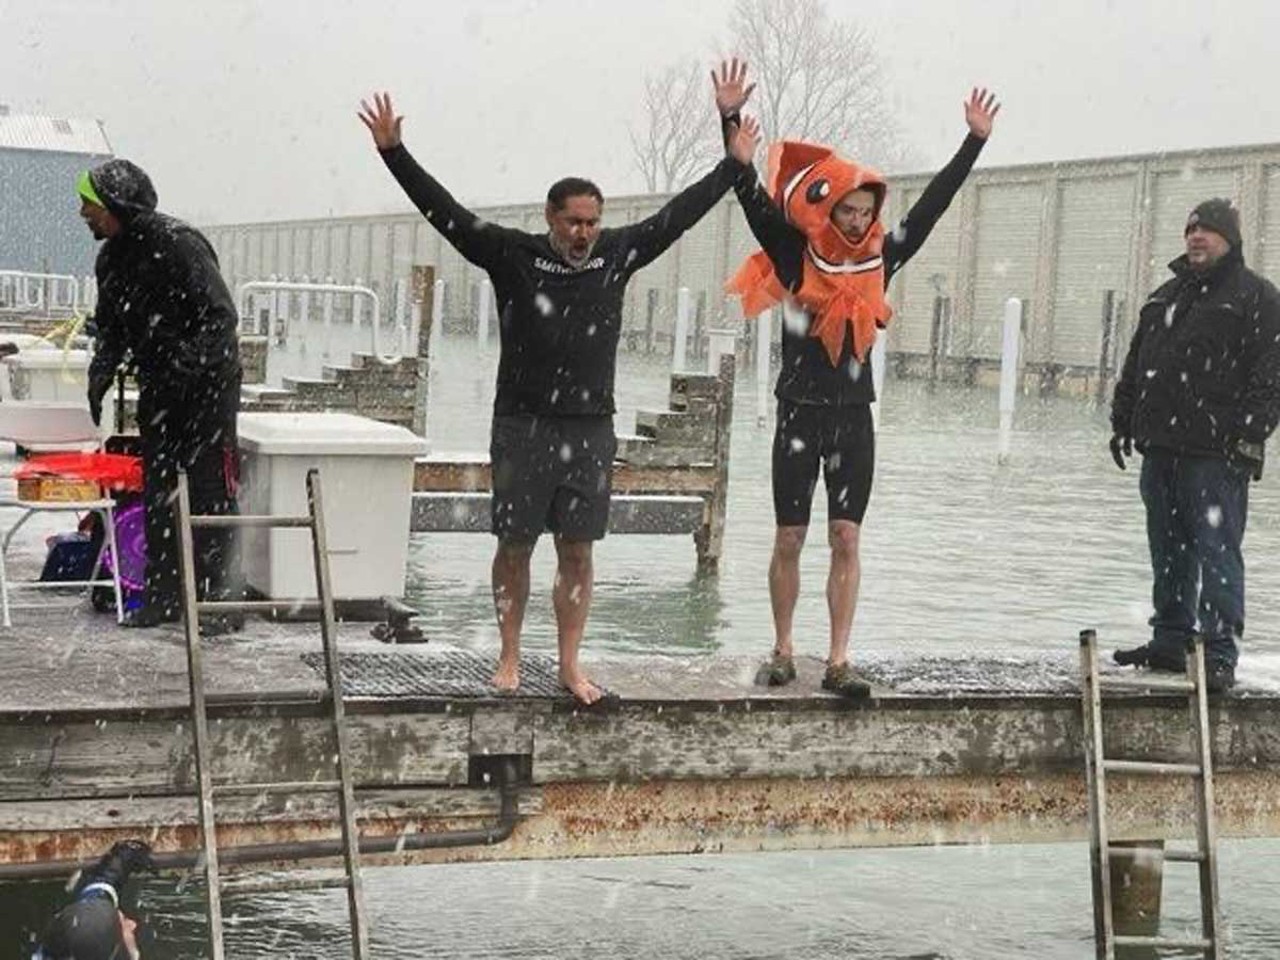 
Detroit Polar Plunge
When: March 1 at 3 p.m.
Where: Bayview Yacht Club
What: A polar plunge and fundraise
Who: Brave souls
Why: To raise money for the Special Olympics of Michigan. 